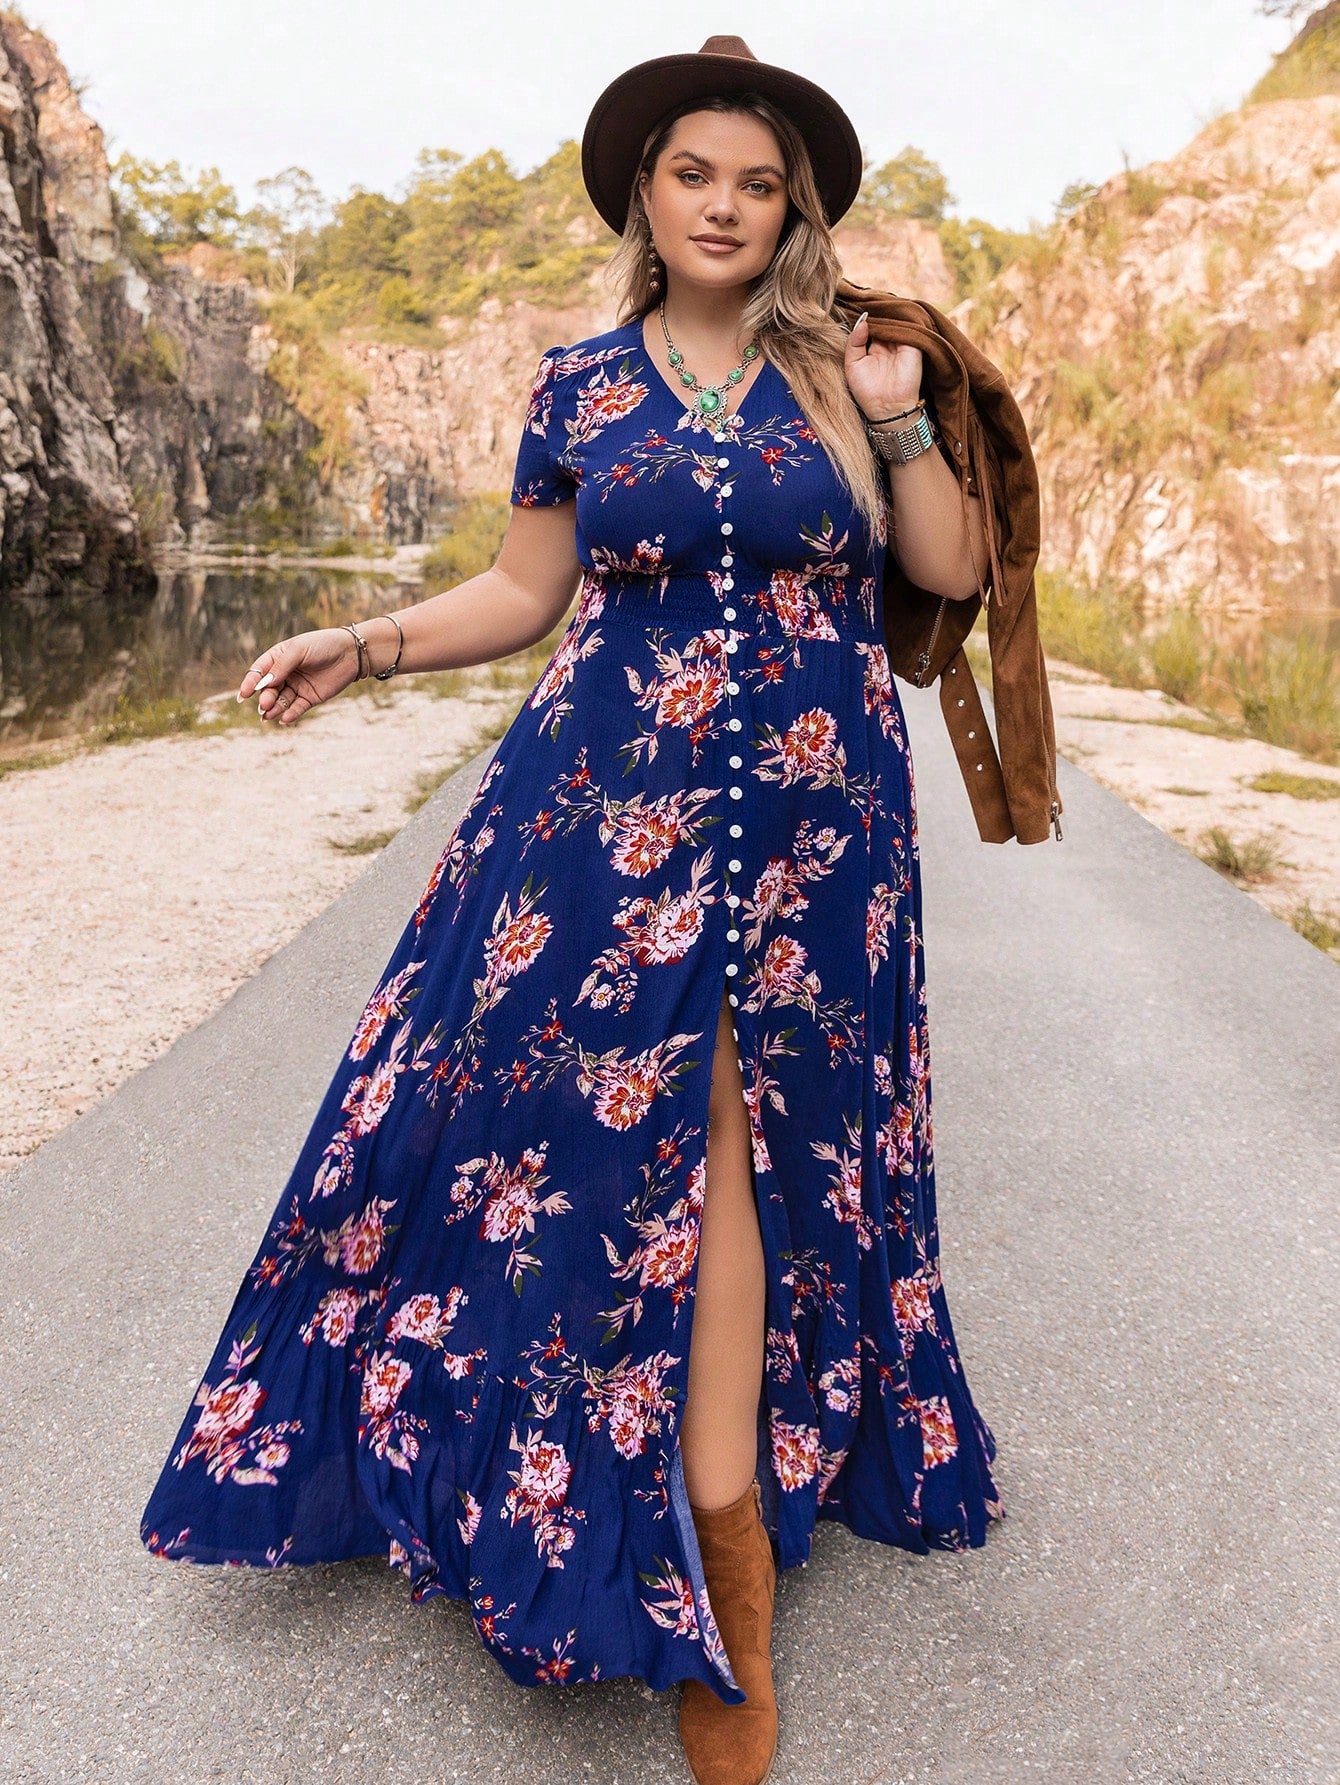 Elegant Floral Plus Size Maxi Dress in Bohemian Style - Perfect for Any Occasion-Free Shipping